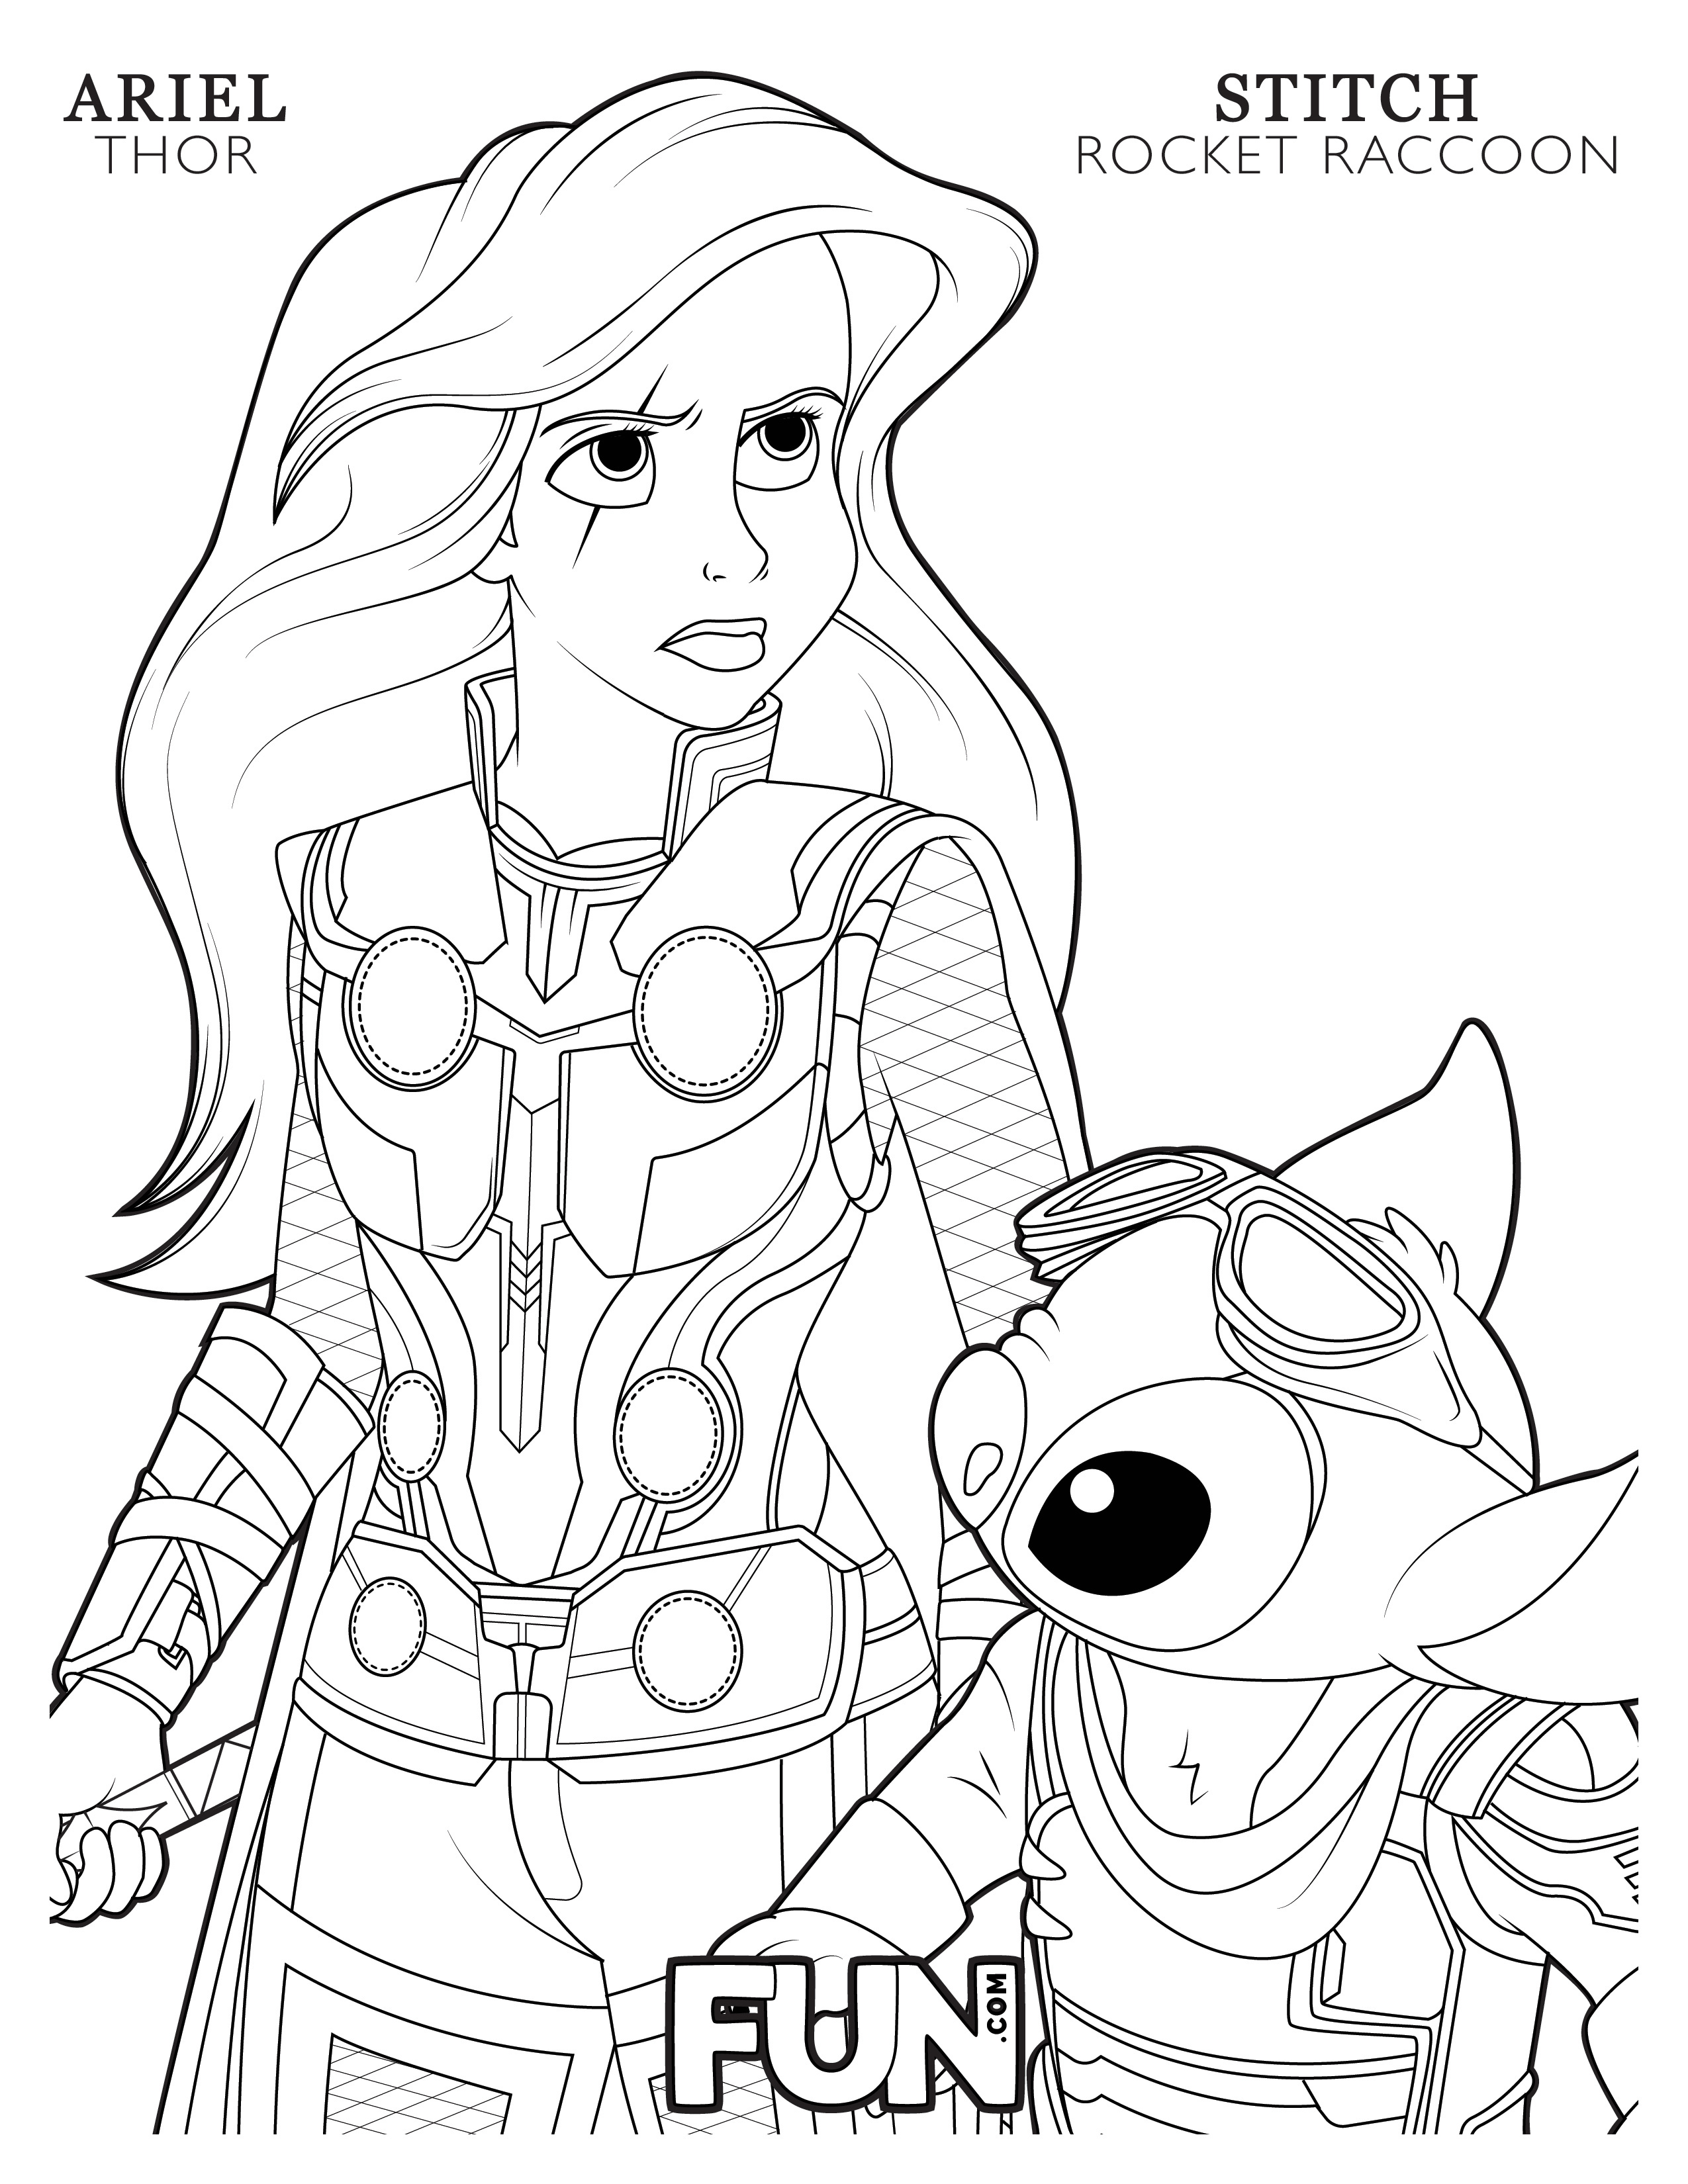 Feel the Magic With These Mashup Disney Coloring Pages [Printables] -   Blog